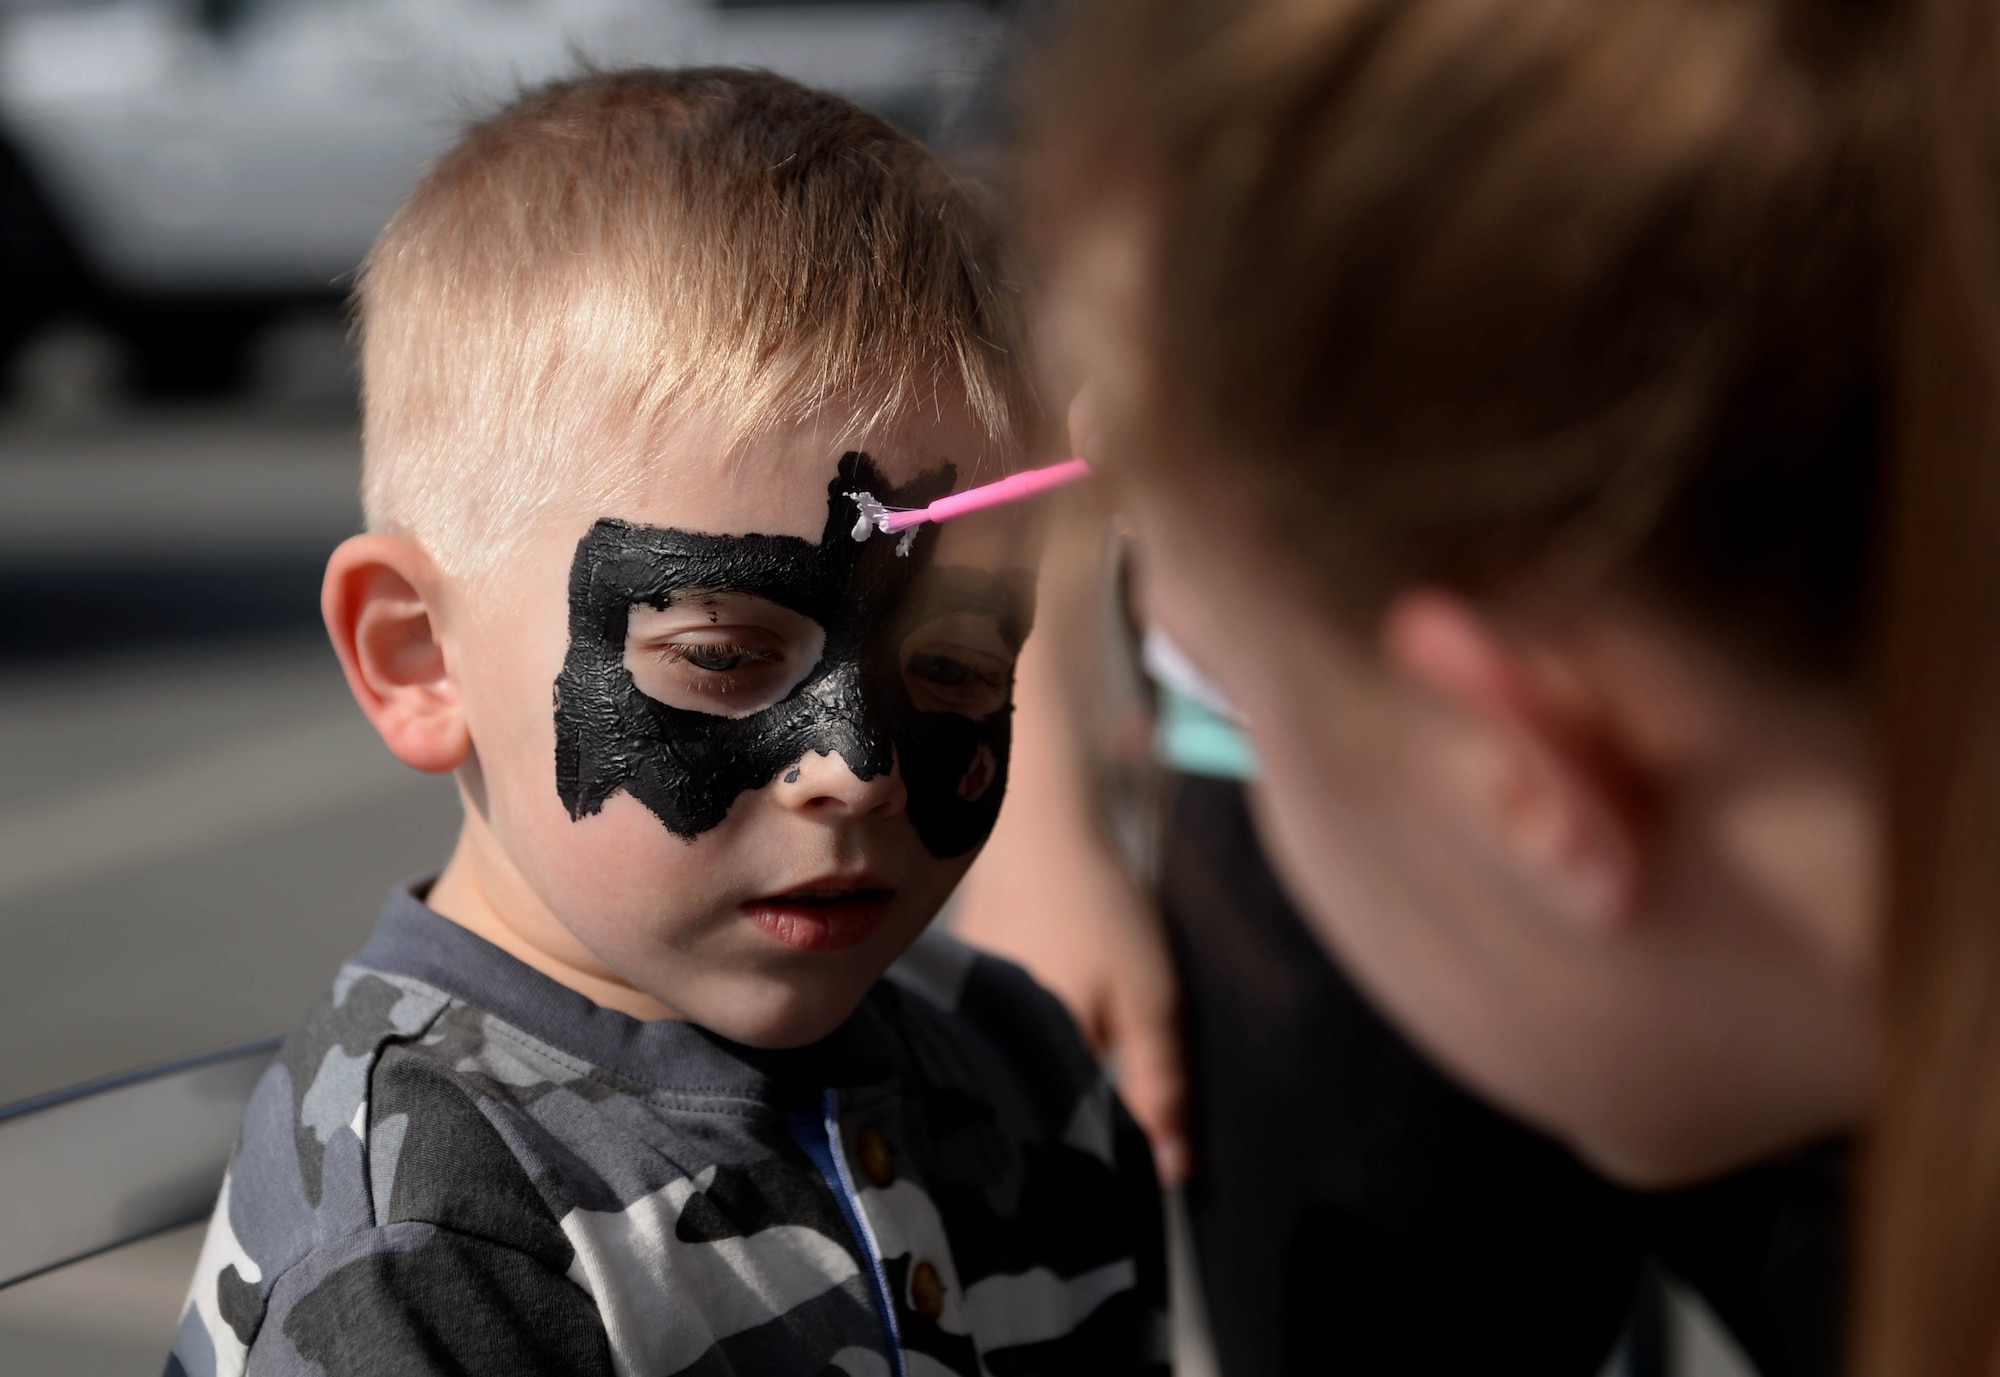 Jacob Stegall, child of Amie Stegall and U.S Air Force Tech Sgt. Robert Stegall, 52nd Logistics Readiness Squadron, receives face paint during the Exceptional Family Member Program Spring Fling at the Base Exchange at Spangdahlem Air Base, March 20, 2015. The Airman & Family Readiness Center hosted the event to raise awareness of the EFMP and the service it provides for families. Members of the base community volunteered to run various activities to ensure family members could experience the fair’s full potential. (U.S. Air Force photo by Airman 1st Class Timothy Kim/Released)